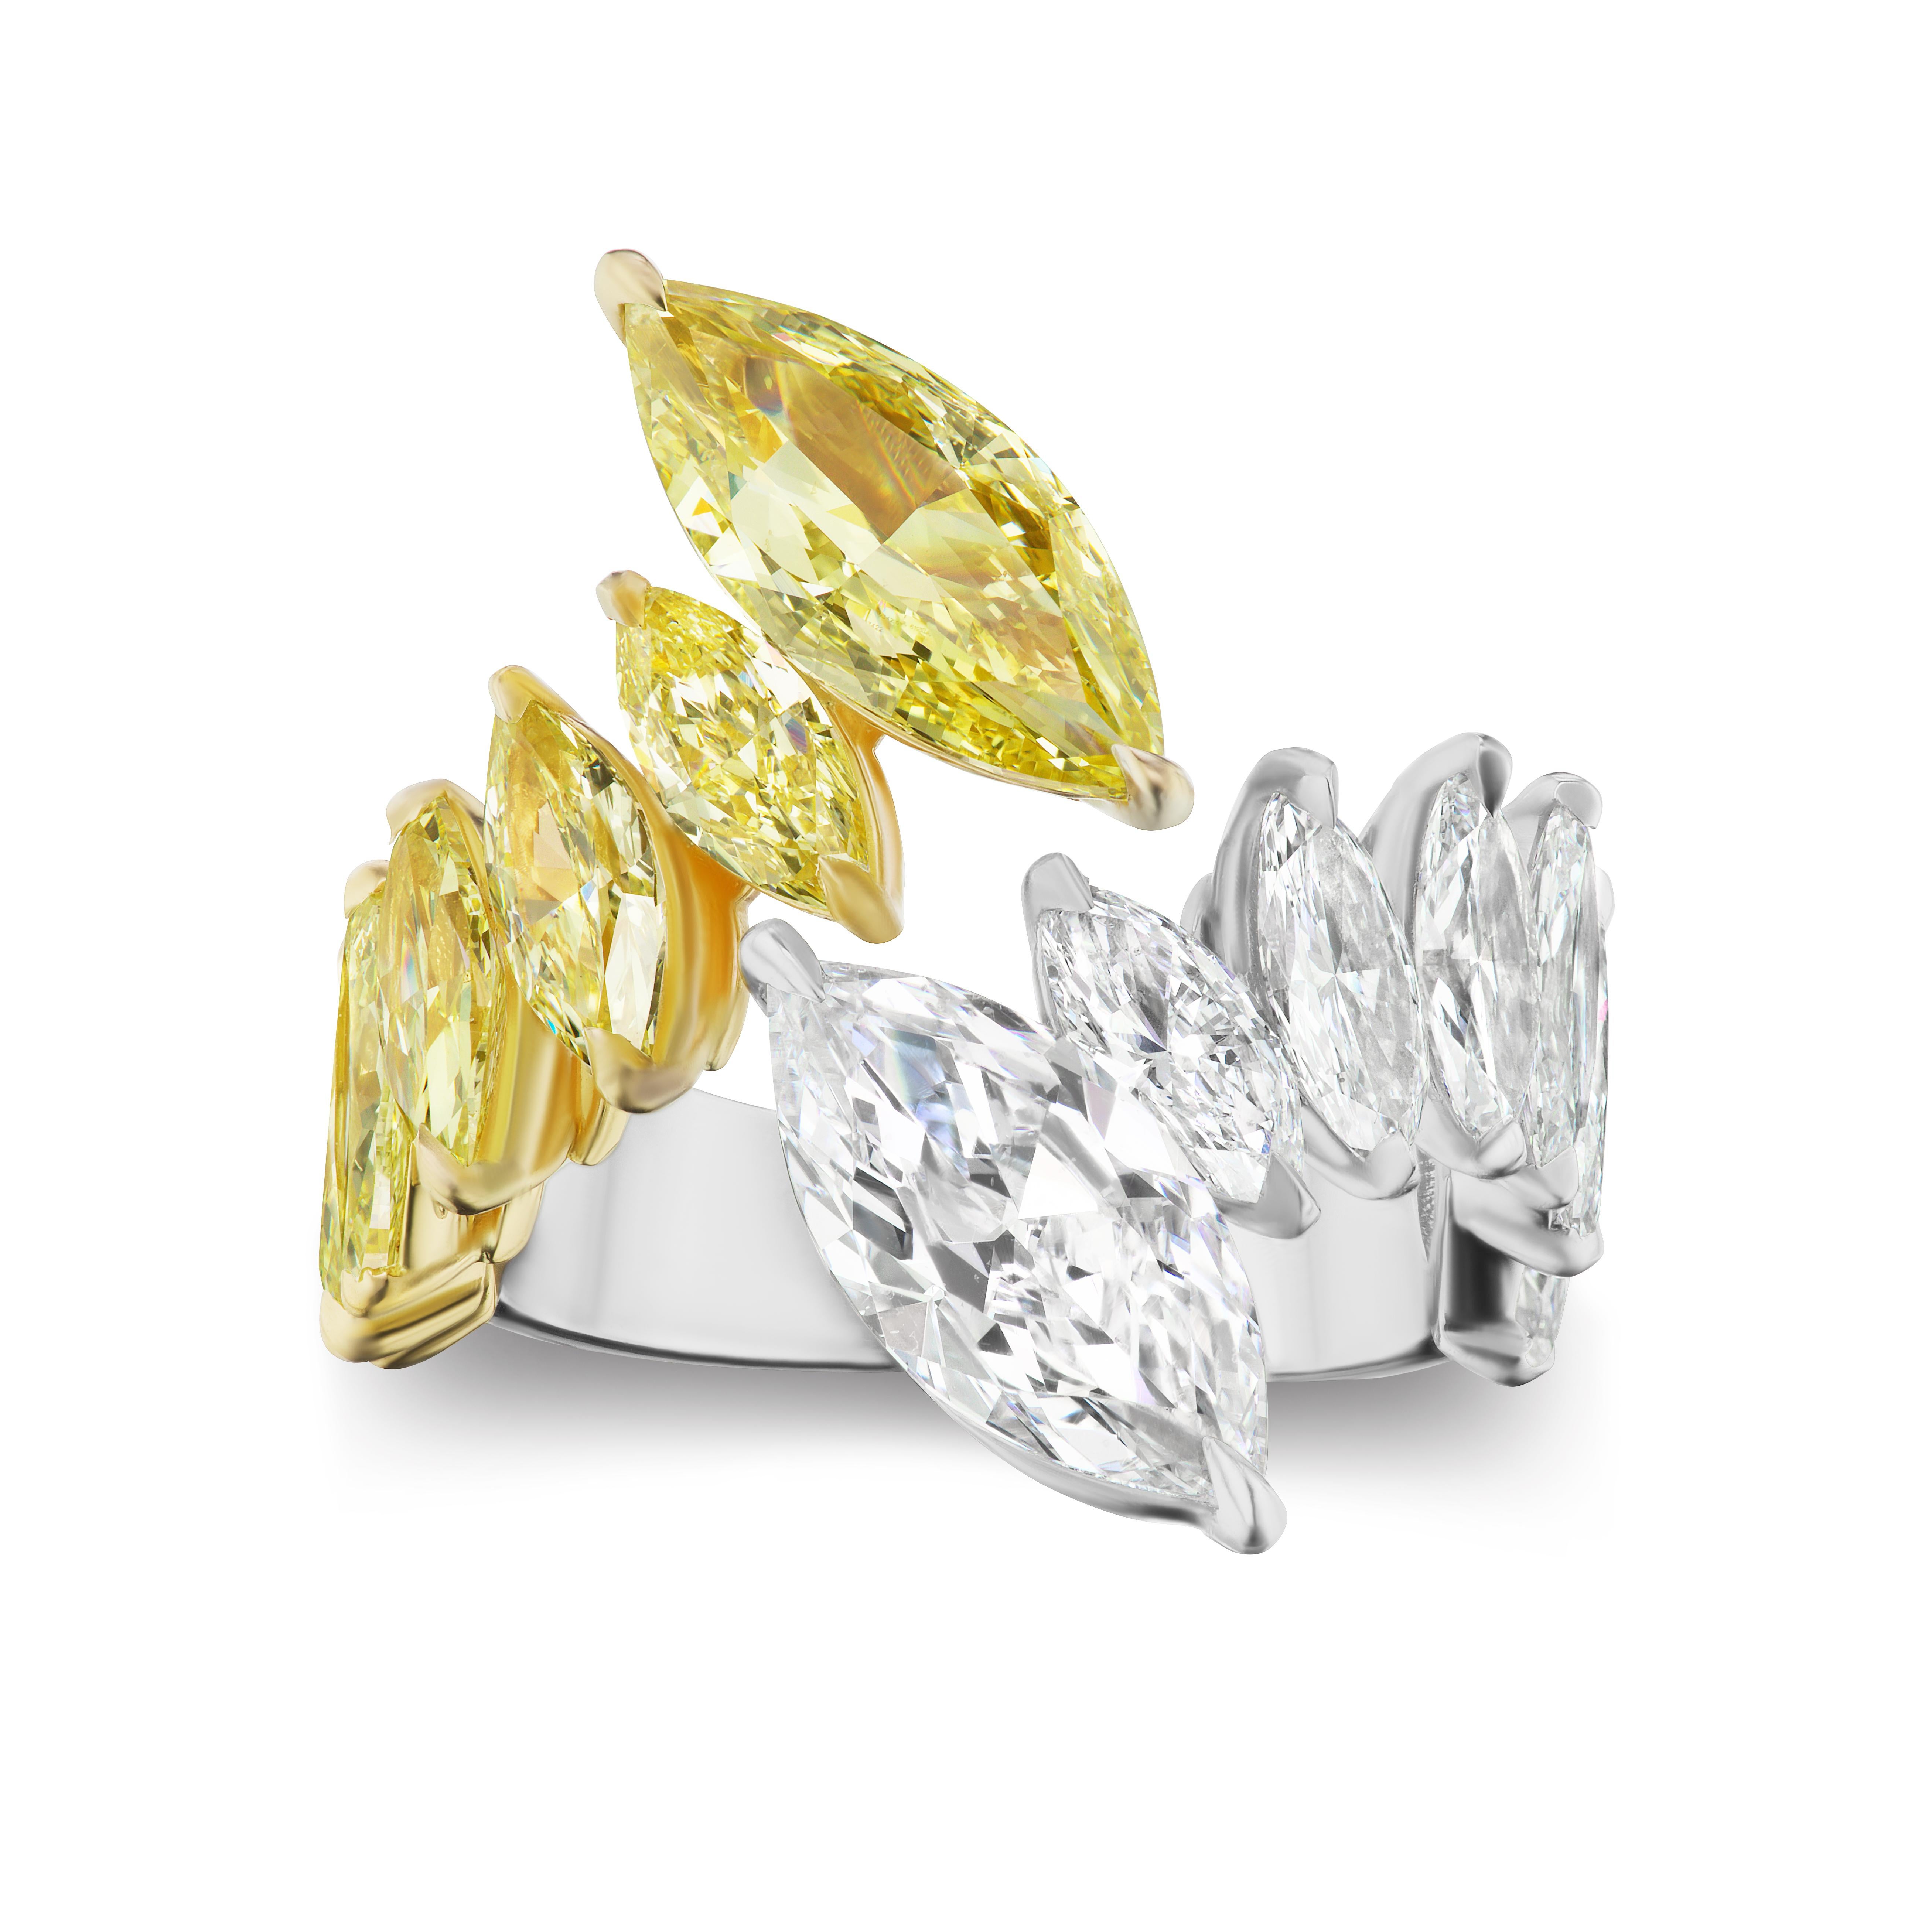 Marquise Shape White and Yellow Diamonds each weighing 2.0 and 2.50 carats respectively.
Set with White and Yellow Marquise Shaped Diamonds weighing 2.40 carats.
Set in Platinum and 18 Karat Rose Gold.